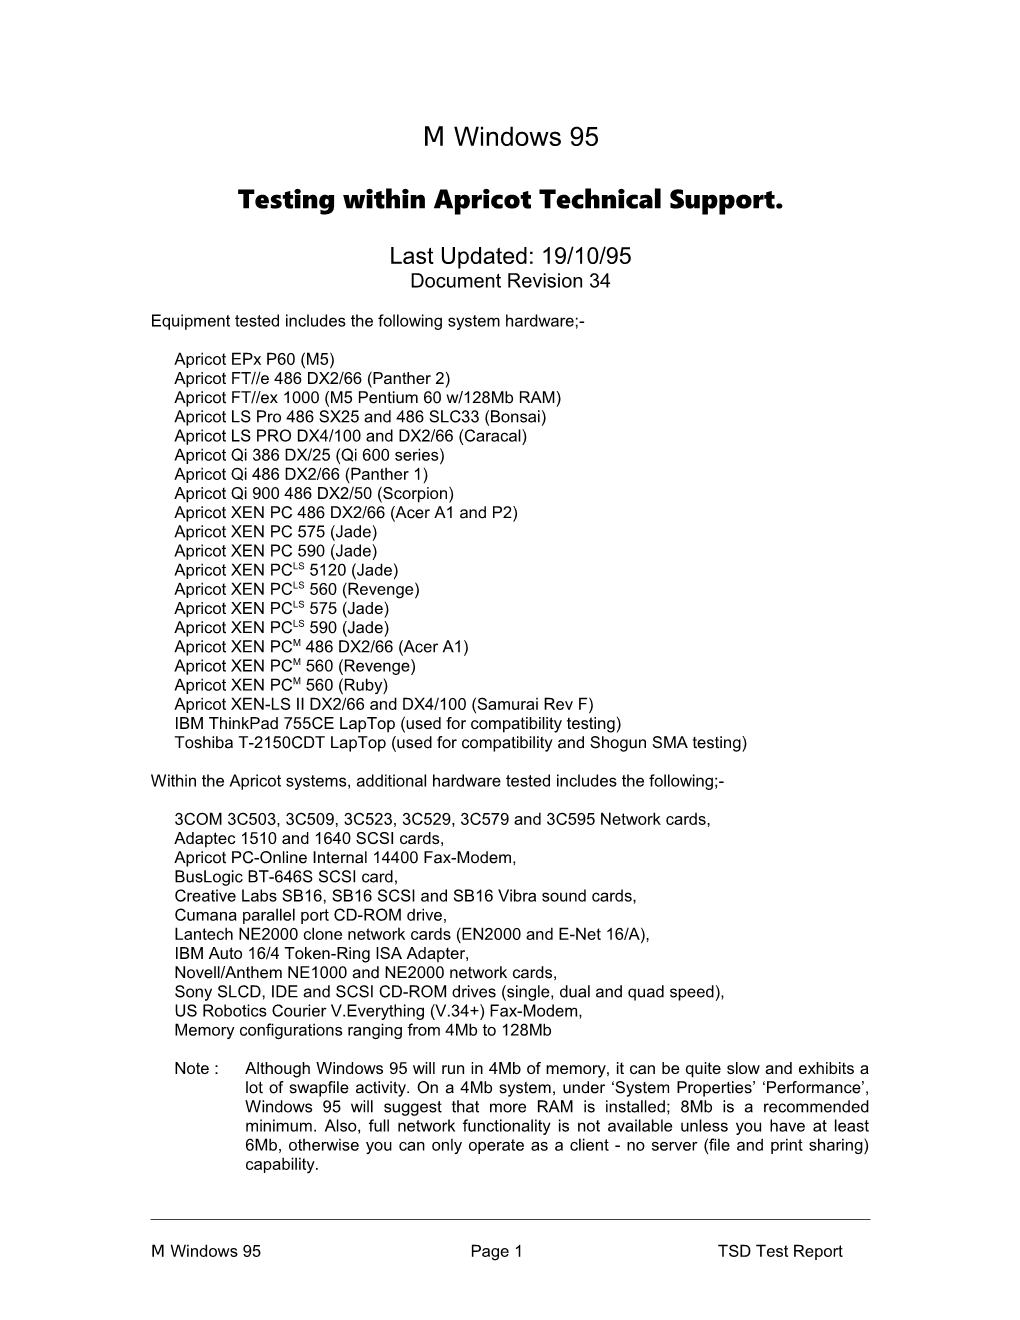 Testing Within Apricot Technical Support